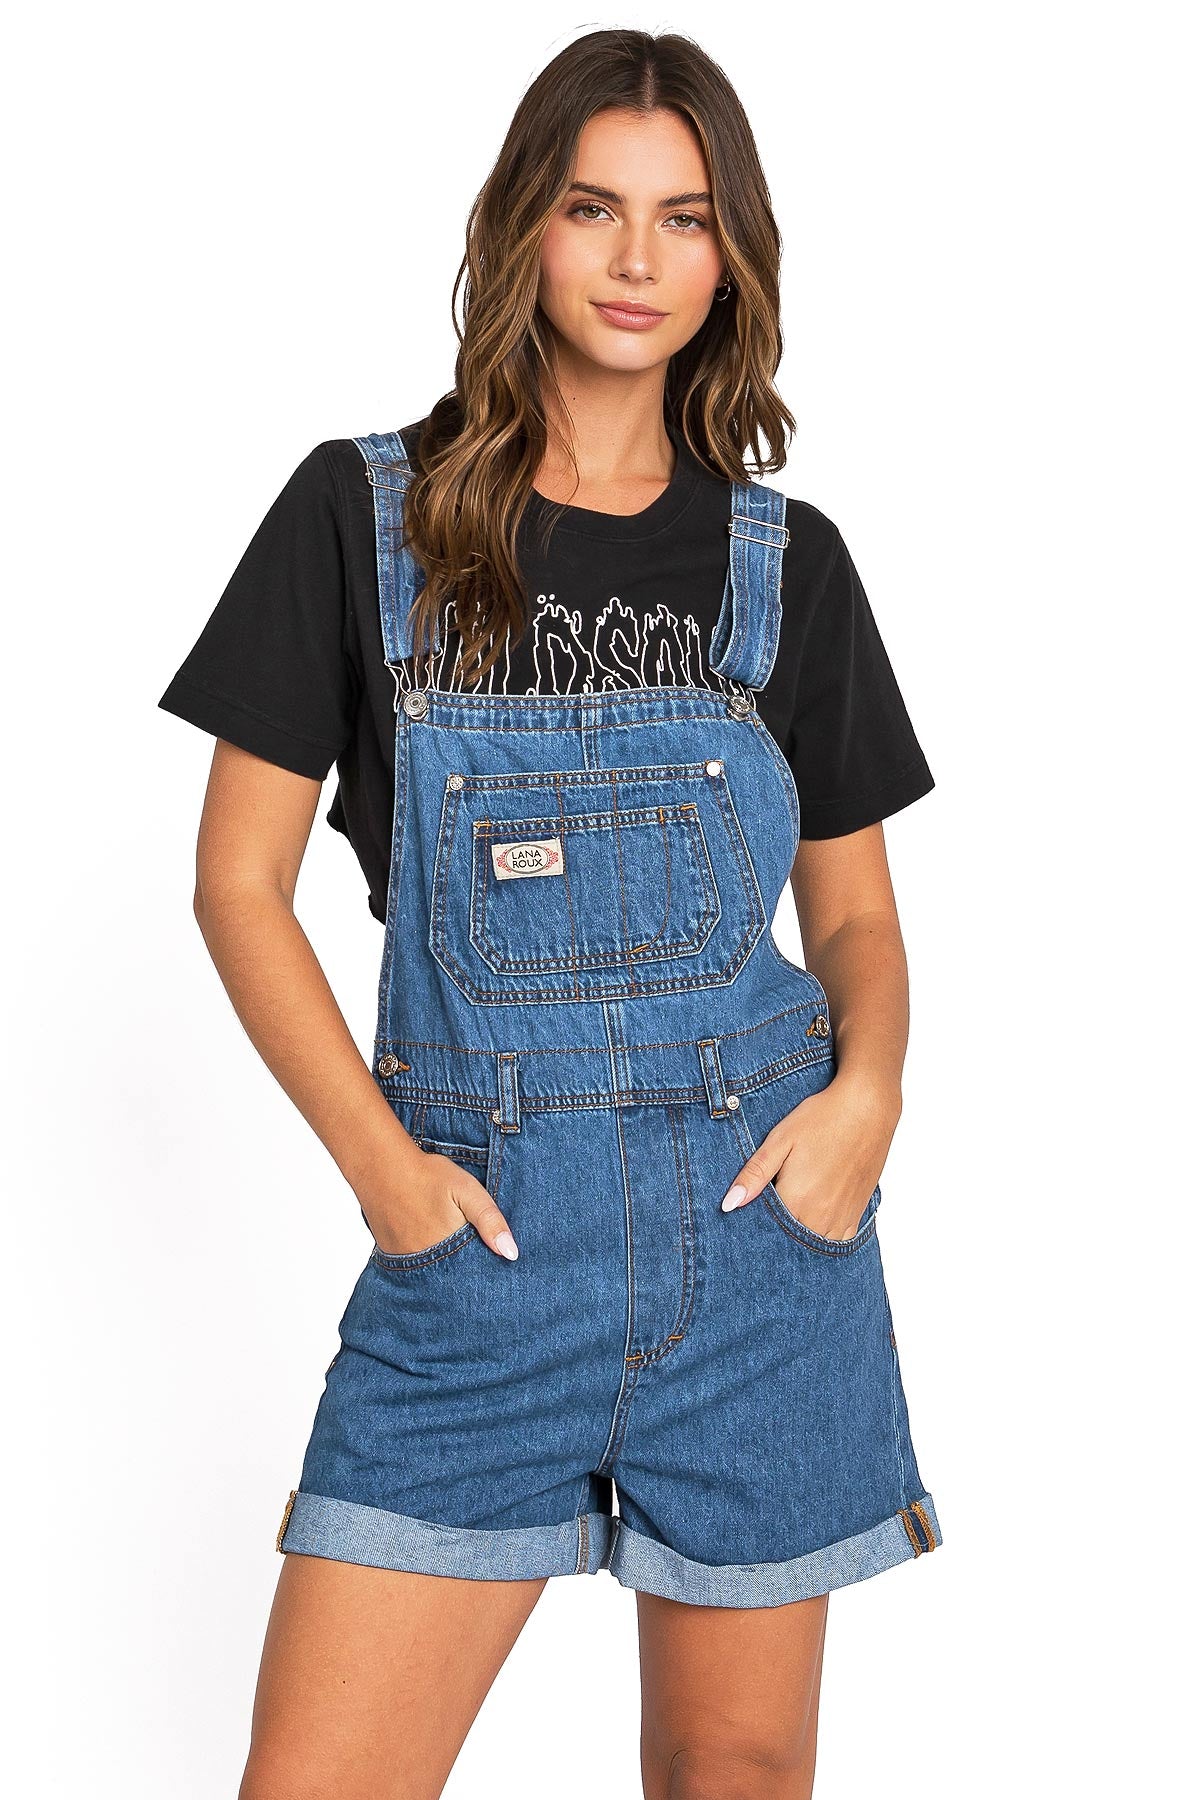 Lana Roux Relaxed Fit Boyfriend Short Overalls